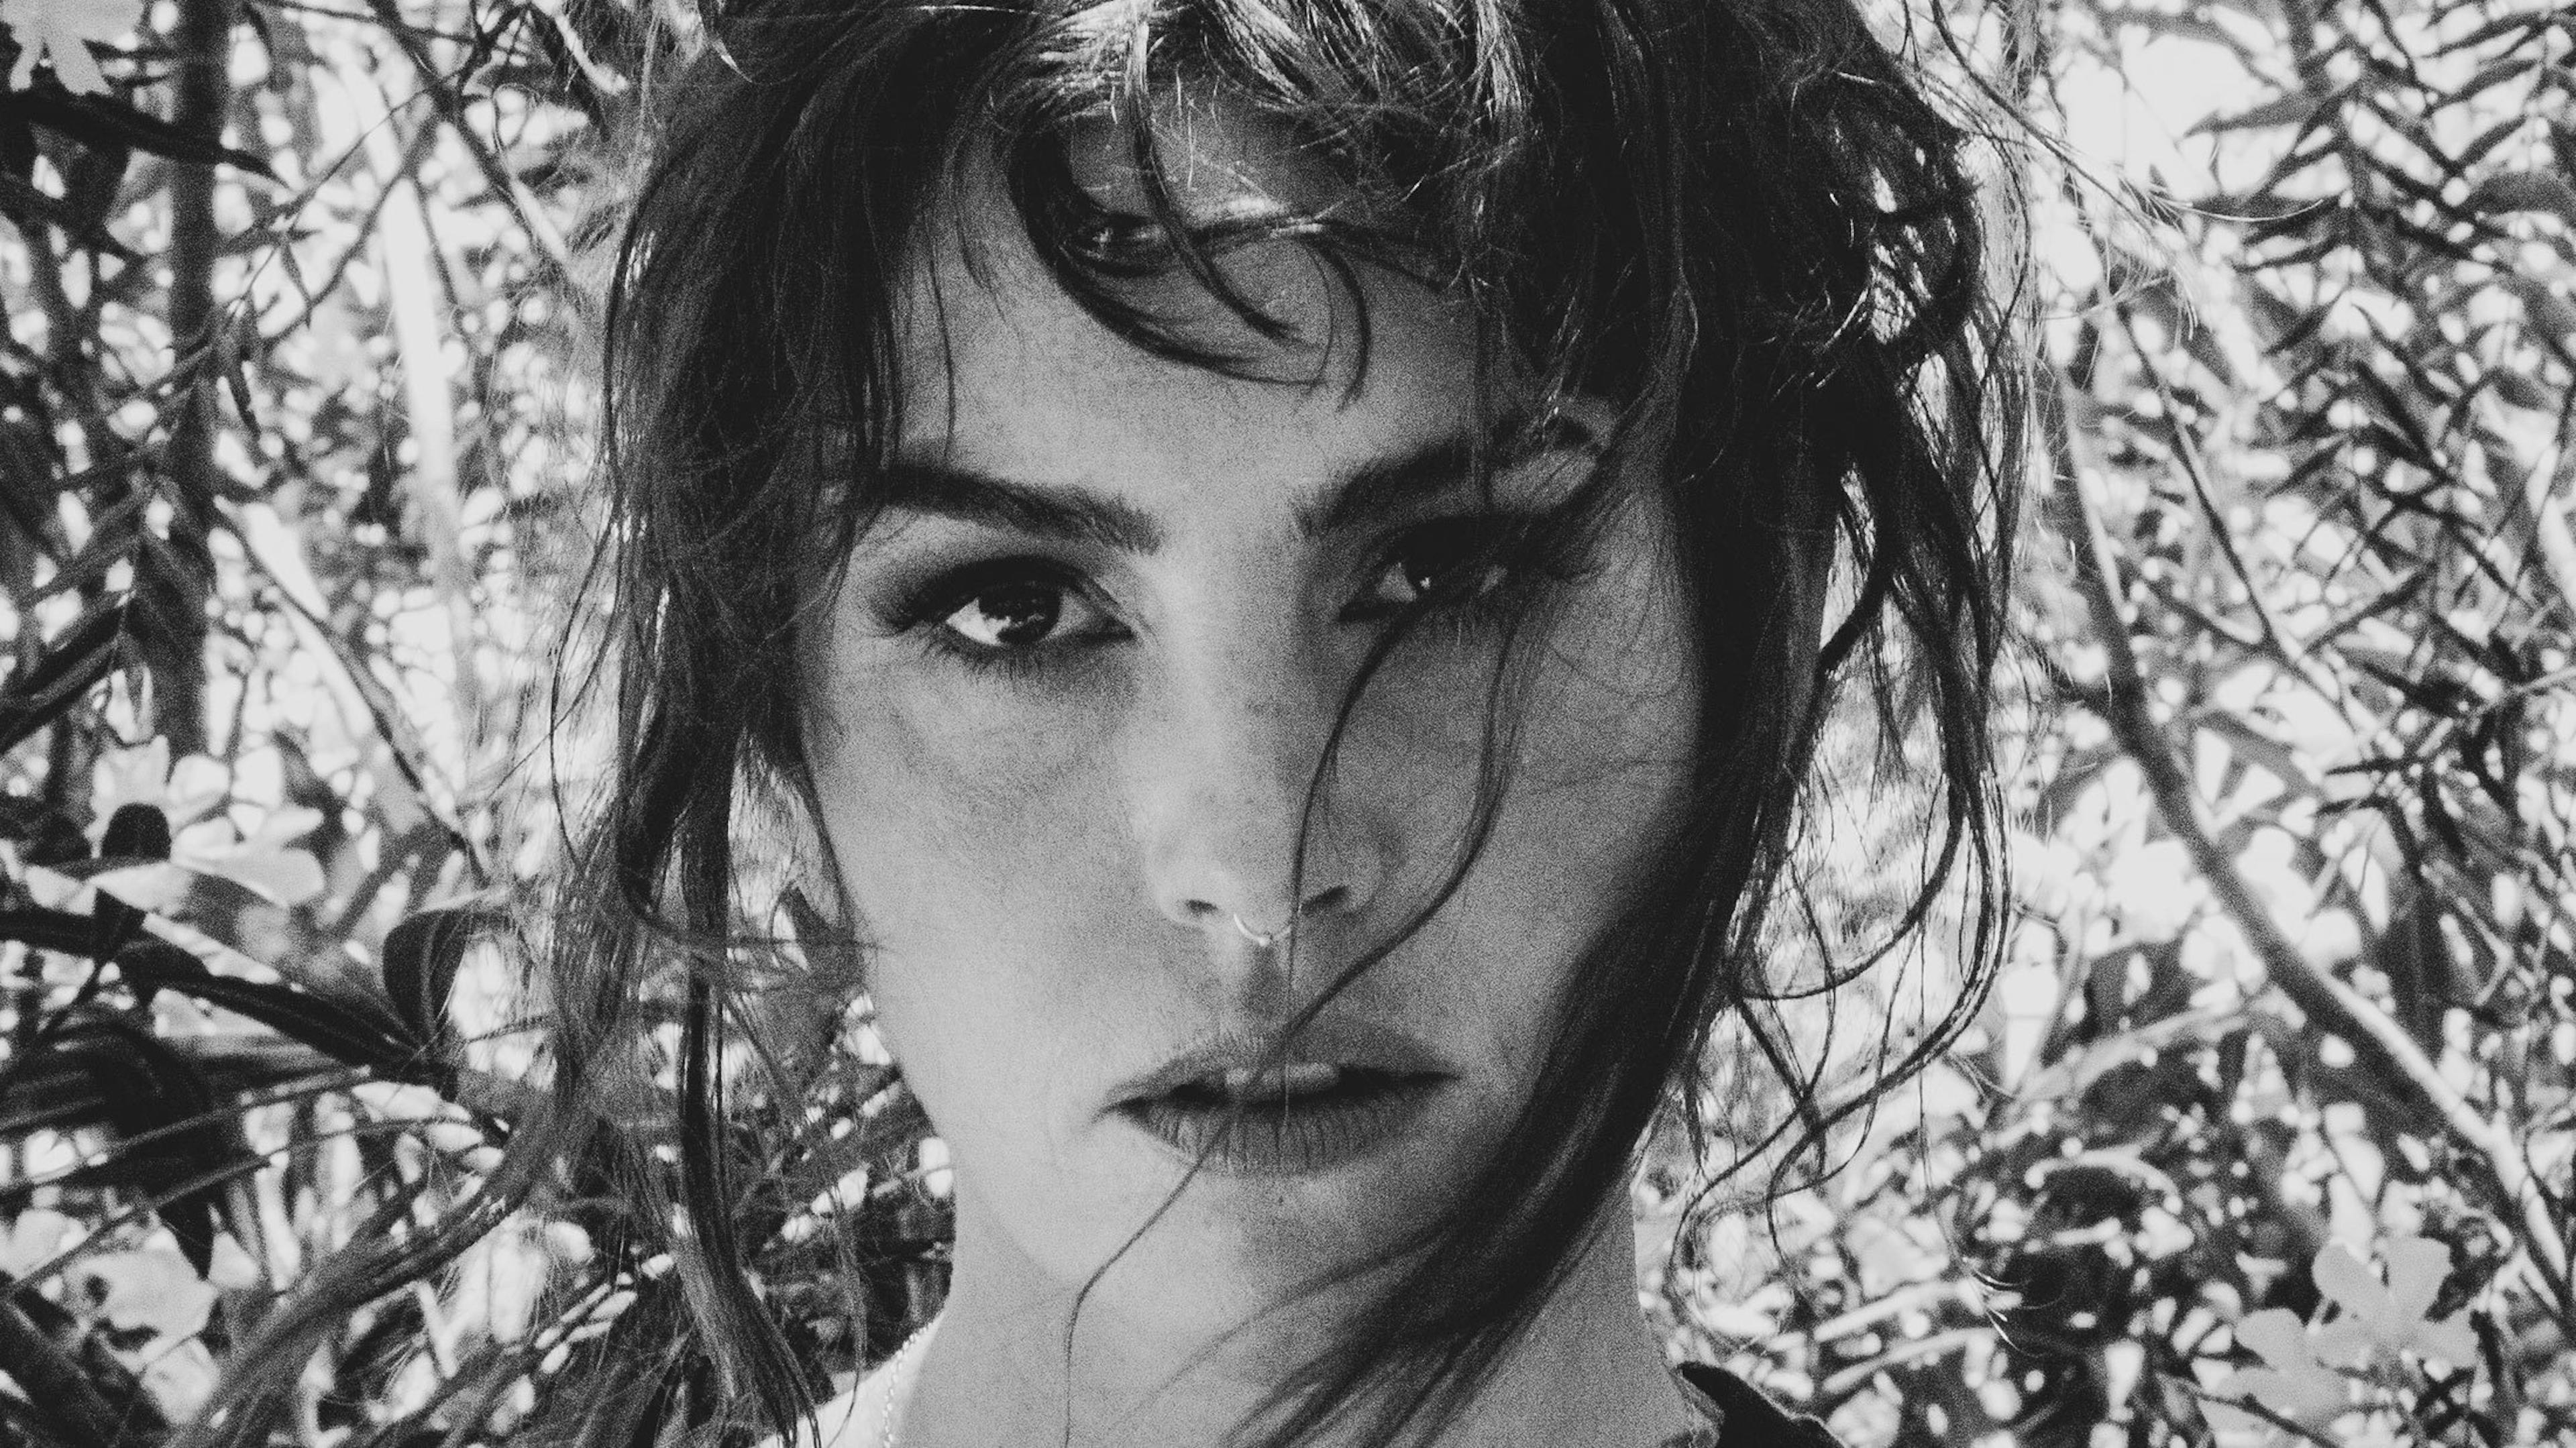 Emma Ruth Rundle: The 10 songs that changed my life